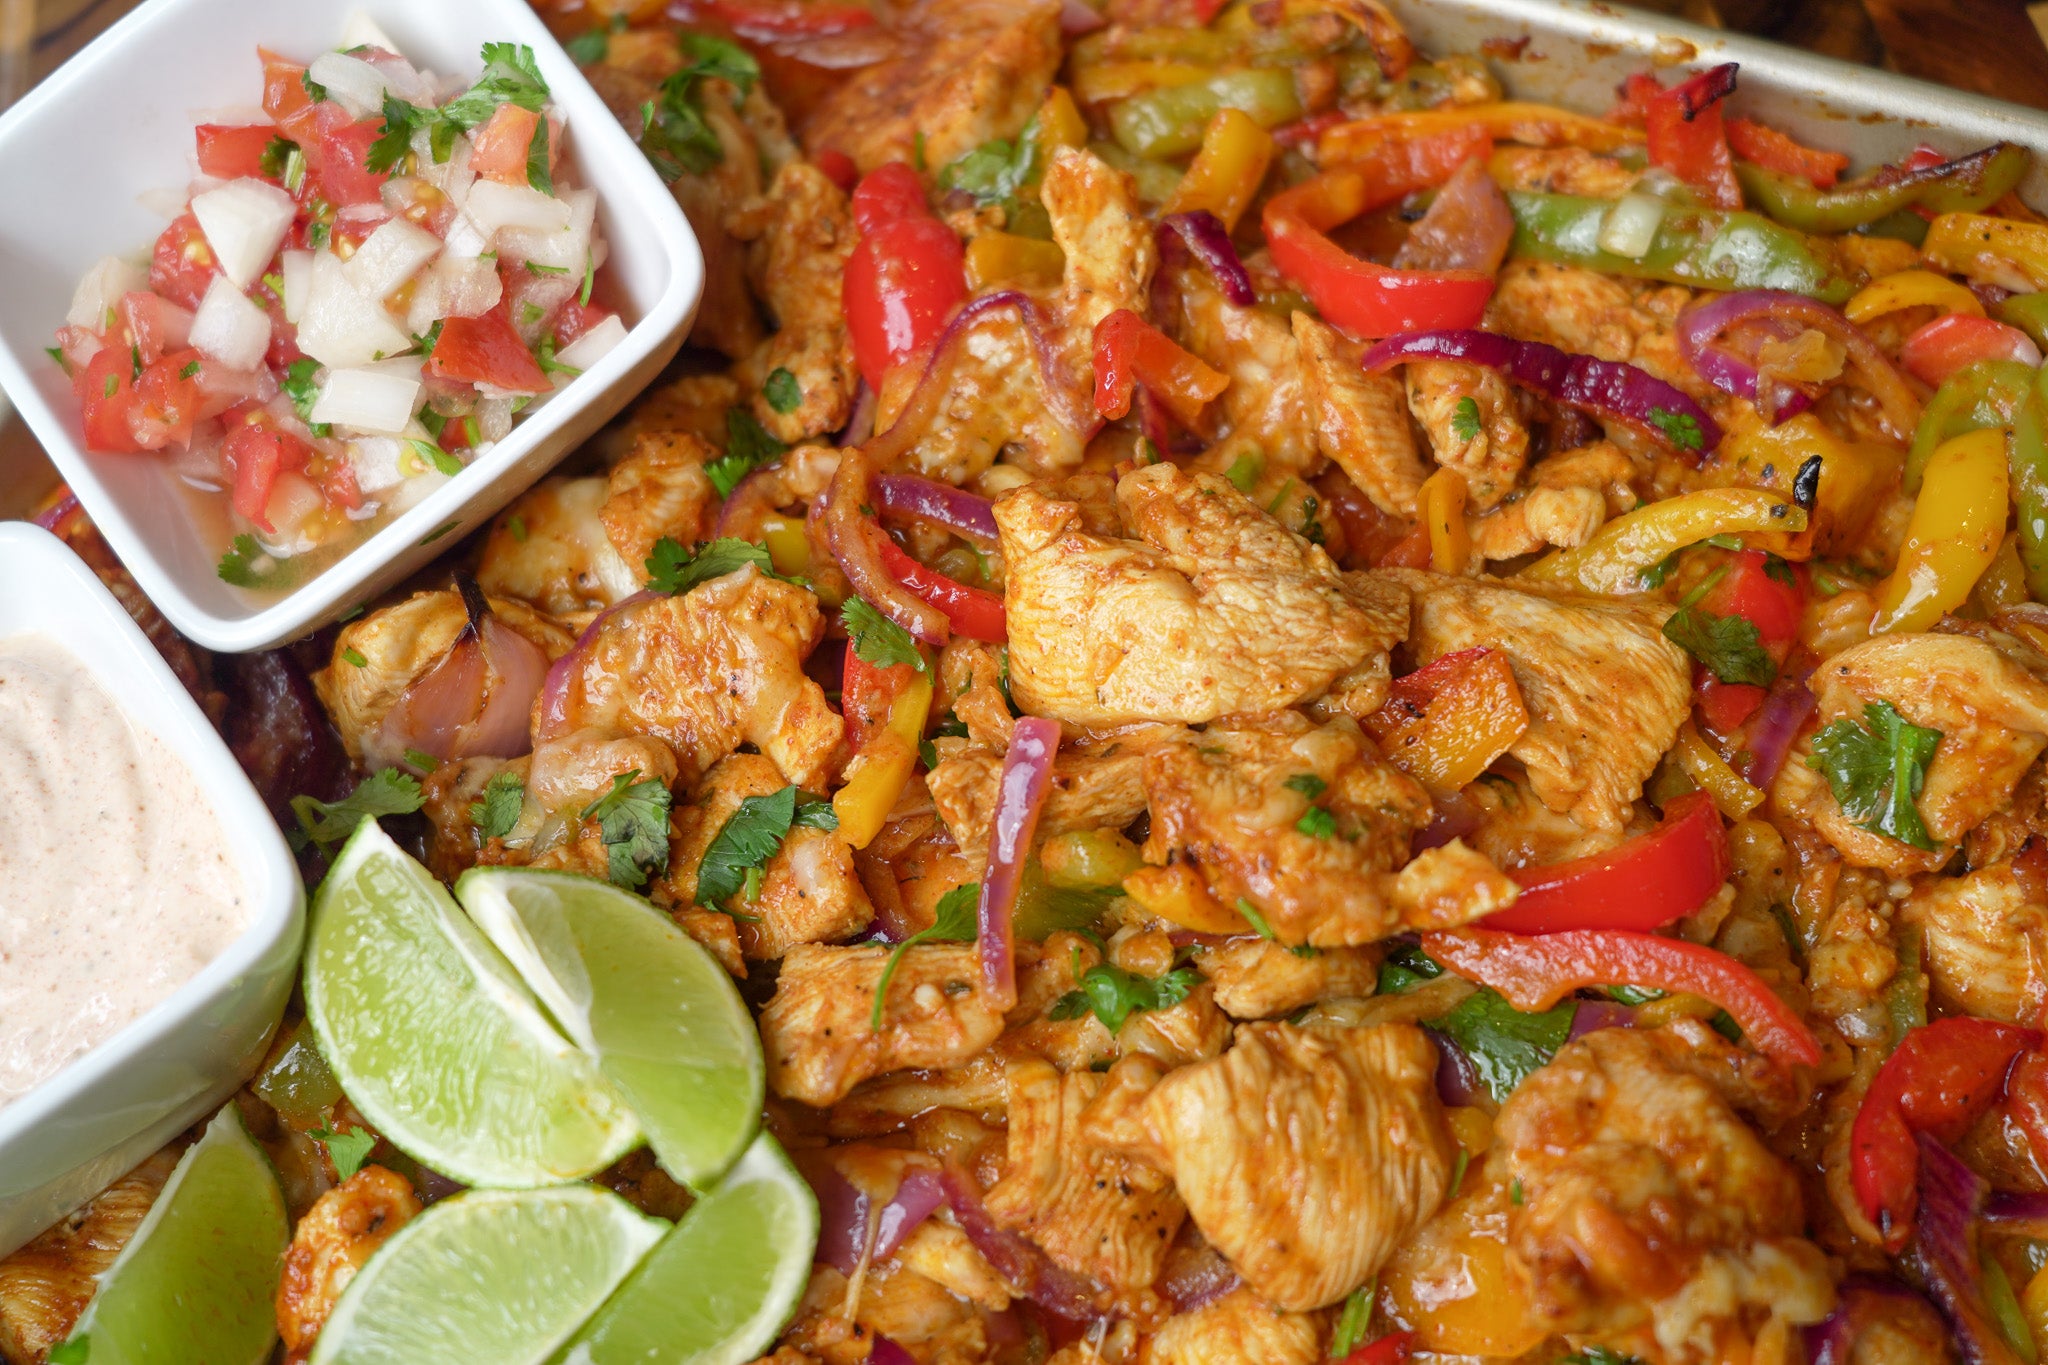 Spice Up Your Meal Prepping with This Festive Chicken Fajita Recipe